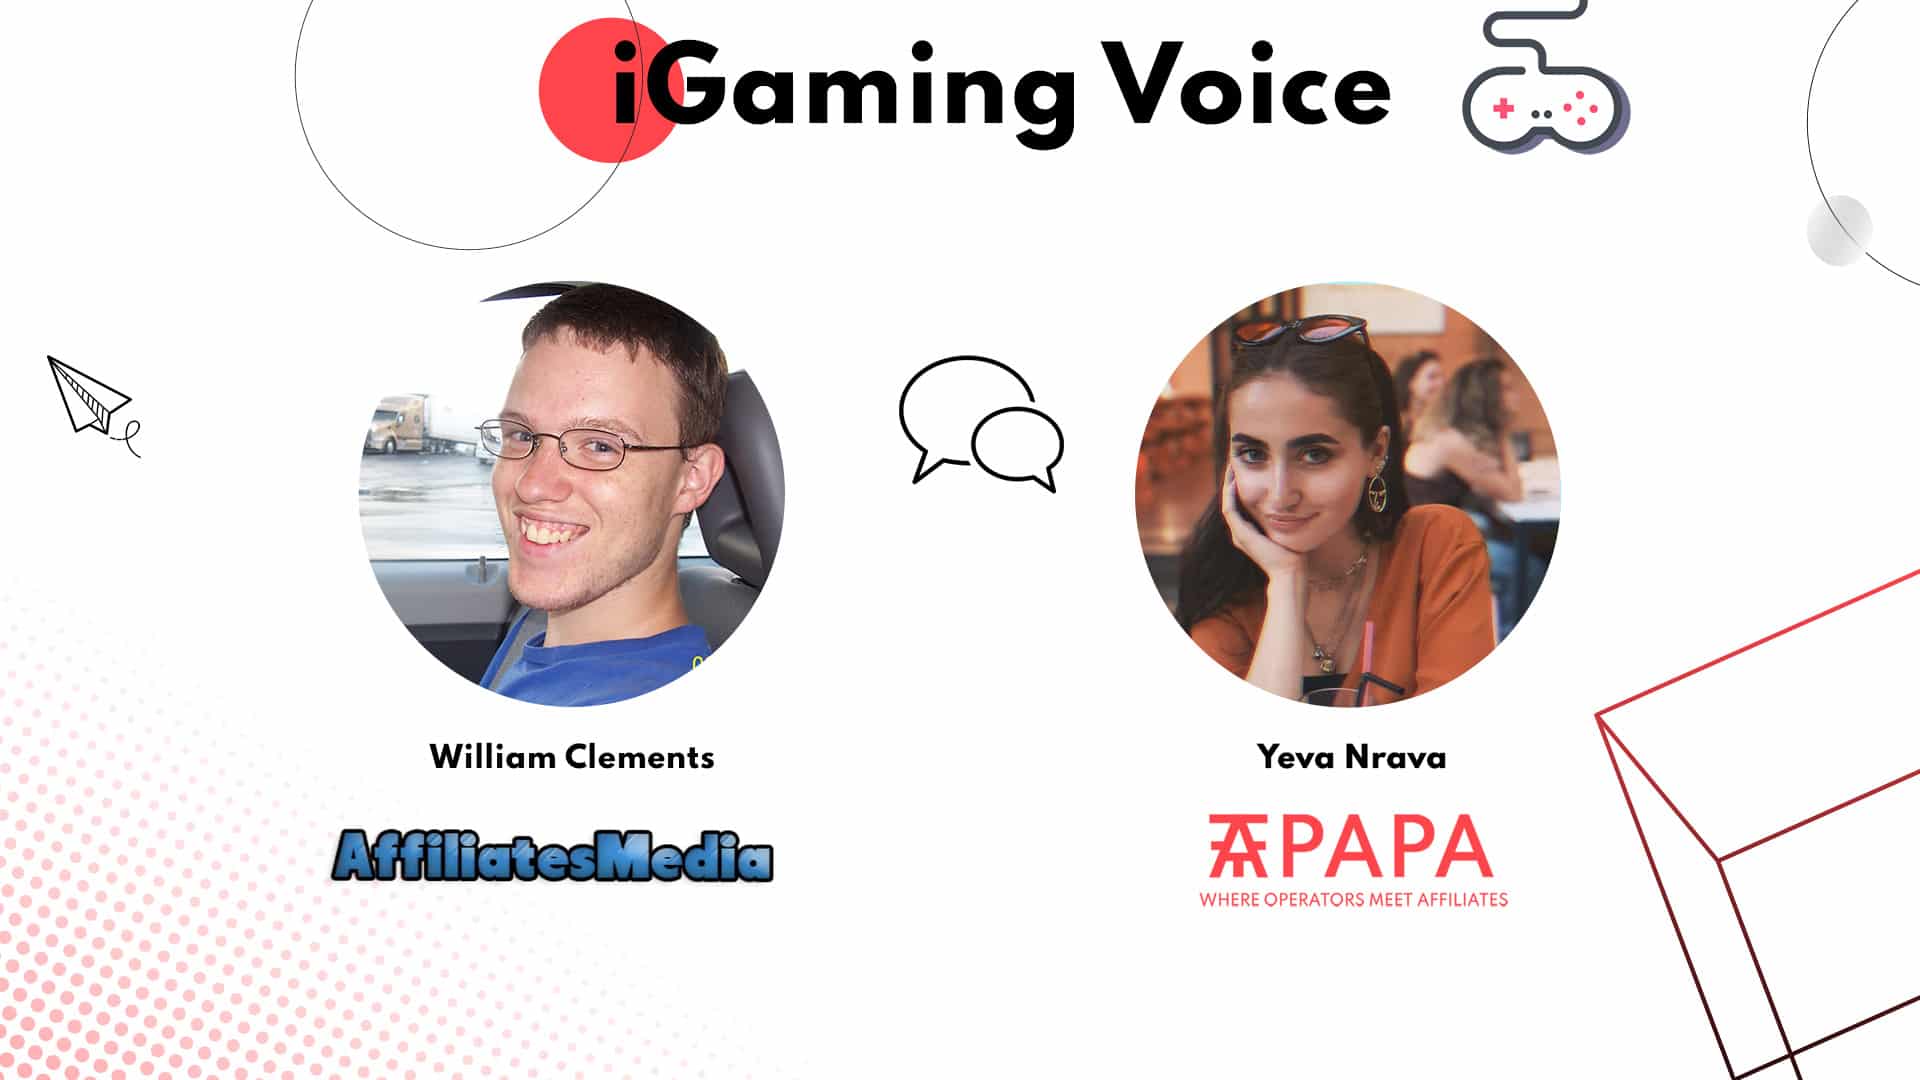 iGaming Voice by Yeva – Affiliate Media